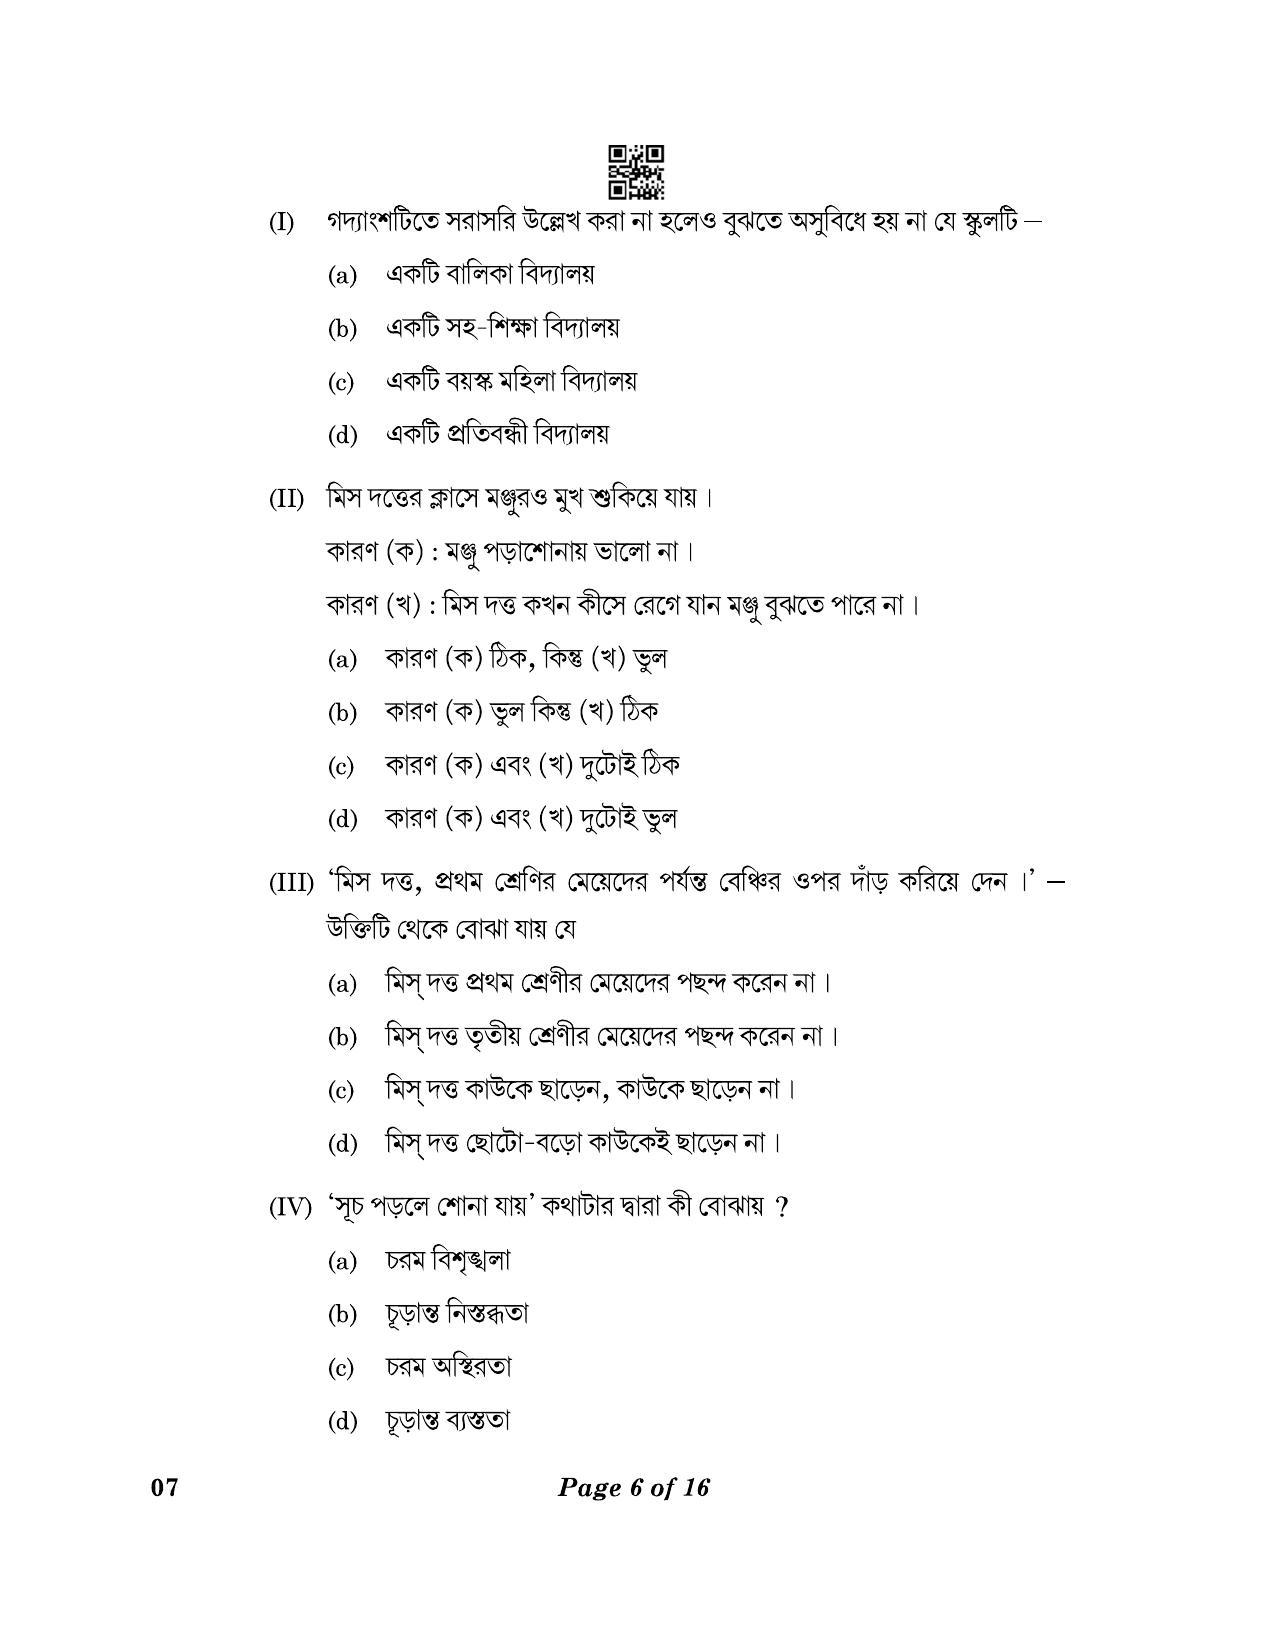 CBSE Class 10 07_Bengali 2023 Question Paper - Page 6